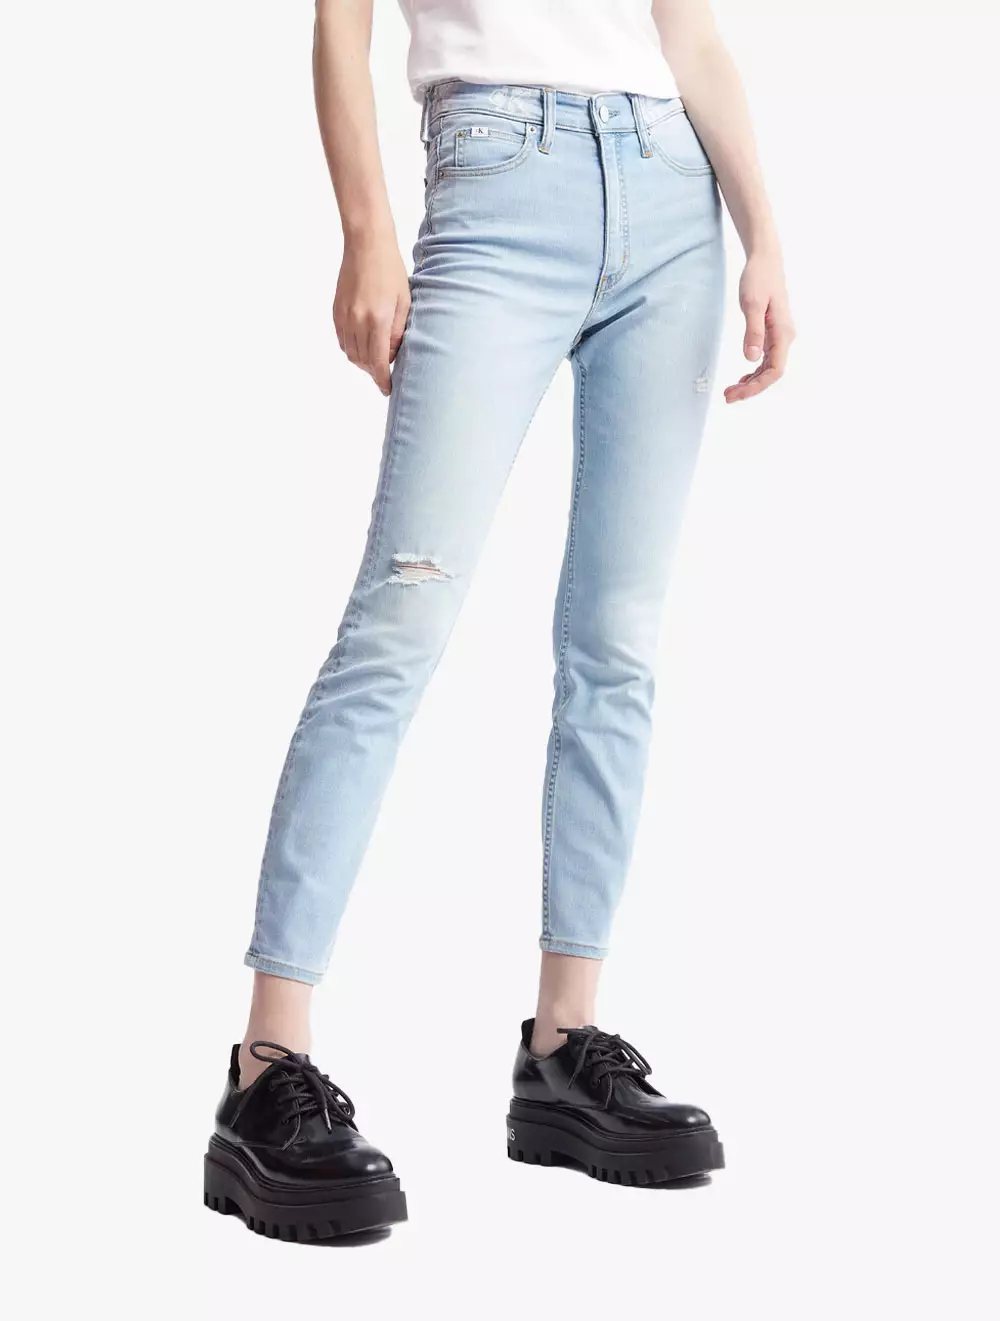 Calvin klein jeans High Rise Skinny Ankle Jeans Blue